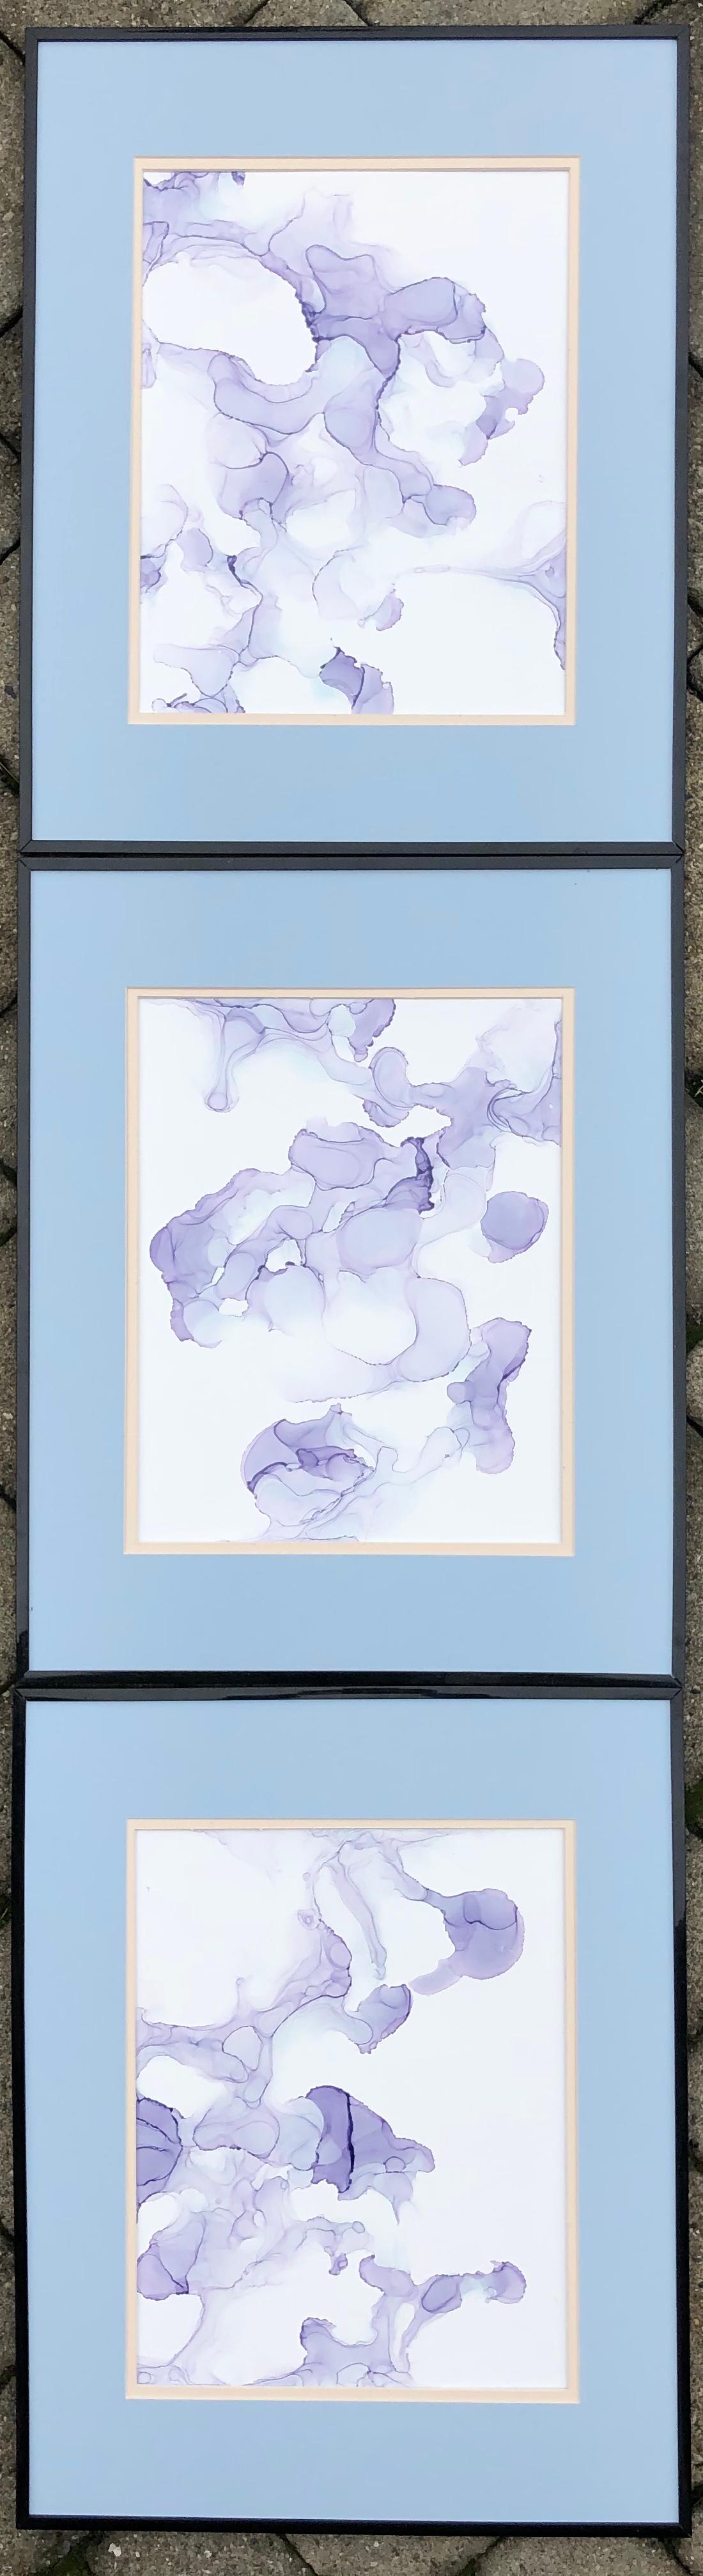 Mila Akopova Abstract Painting – Line of Fate II-abstraction art, made in pale violet, blue, lavender color